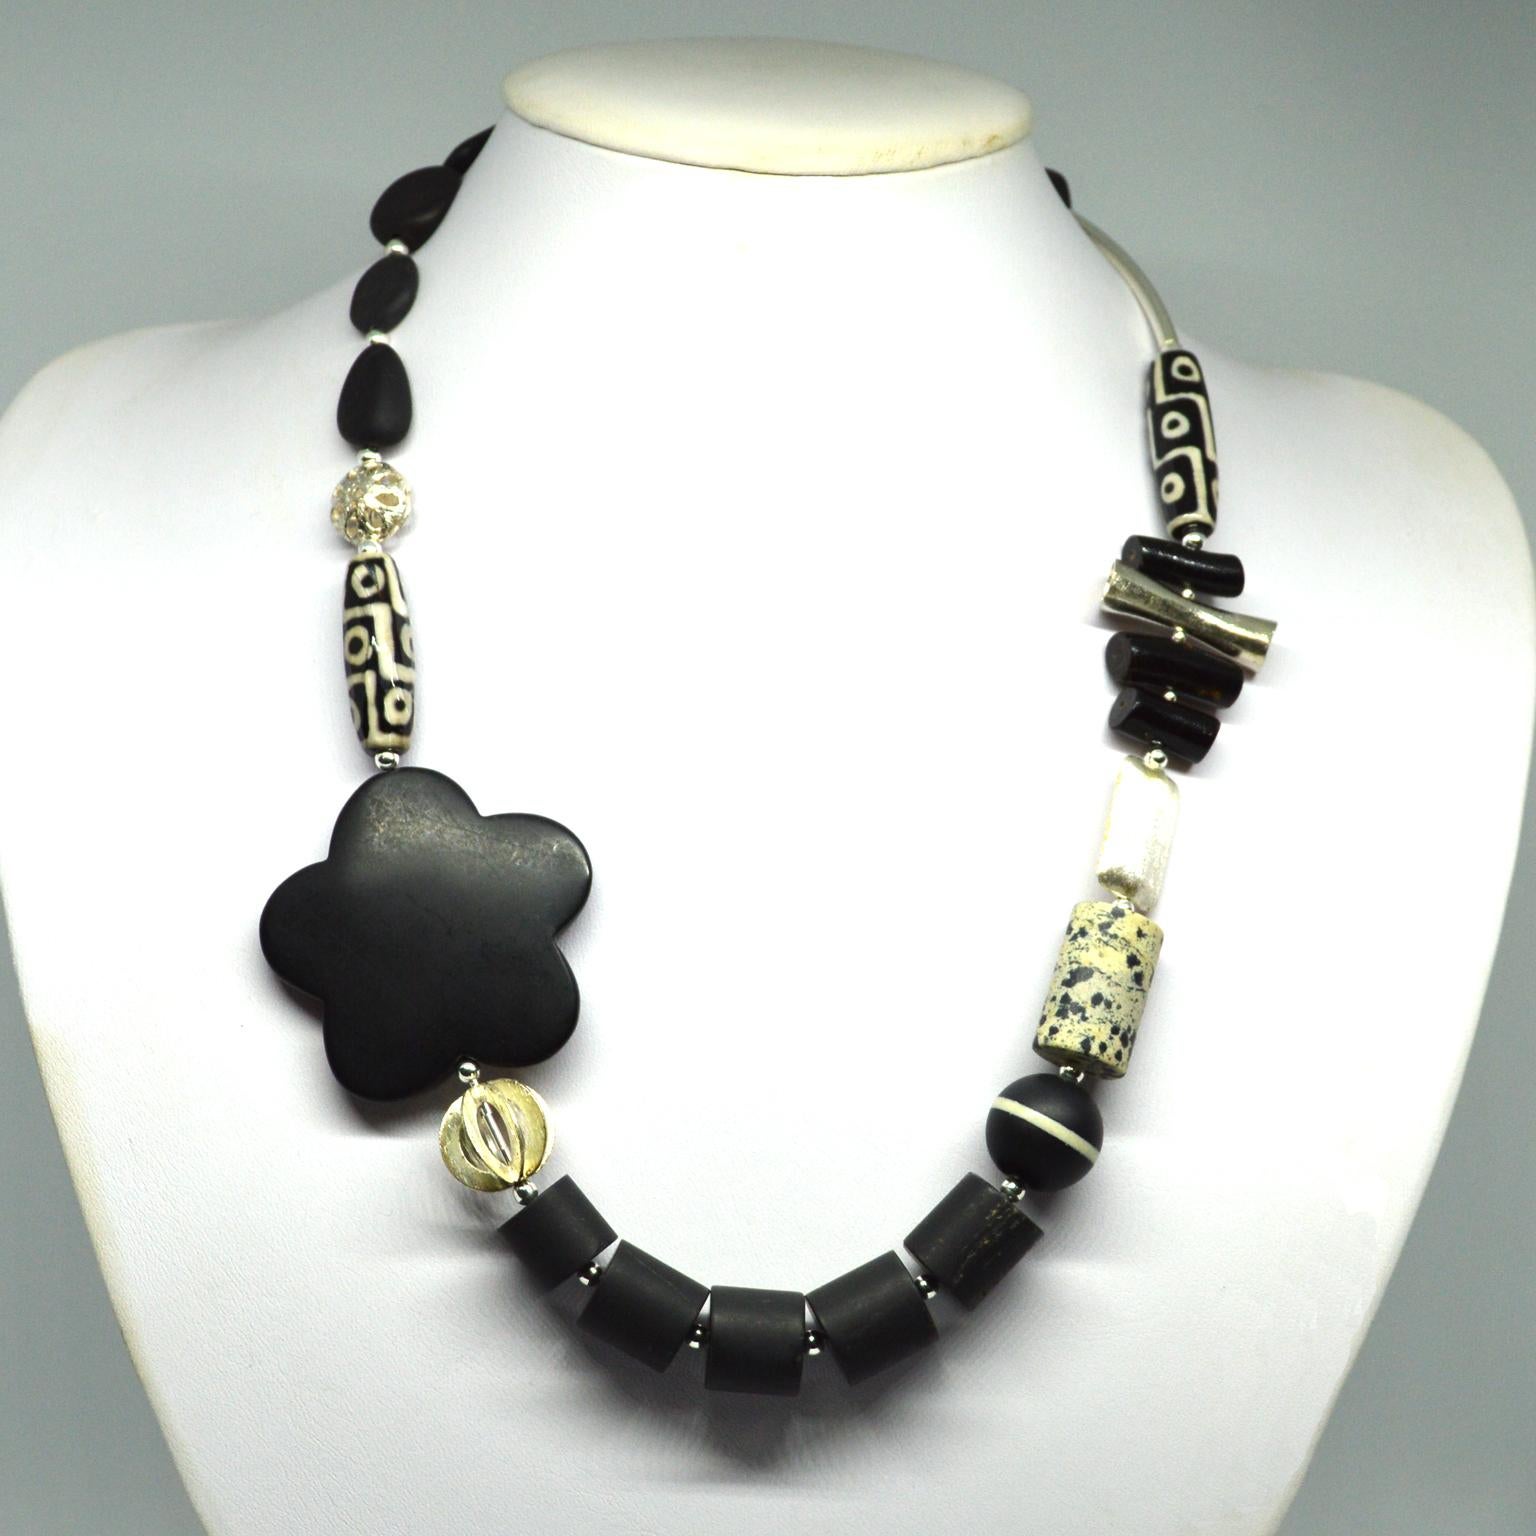 Asymetrical funky necklace. Mixed design of matt onyx, tibetan agate, dalmation jasper and sterling silver beads. Hand knotted for strength and durability.
Necklace length 20.86 inches sterling silver hook clasp.
Large flower 1.77 inches (4.5cm)